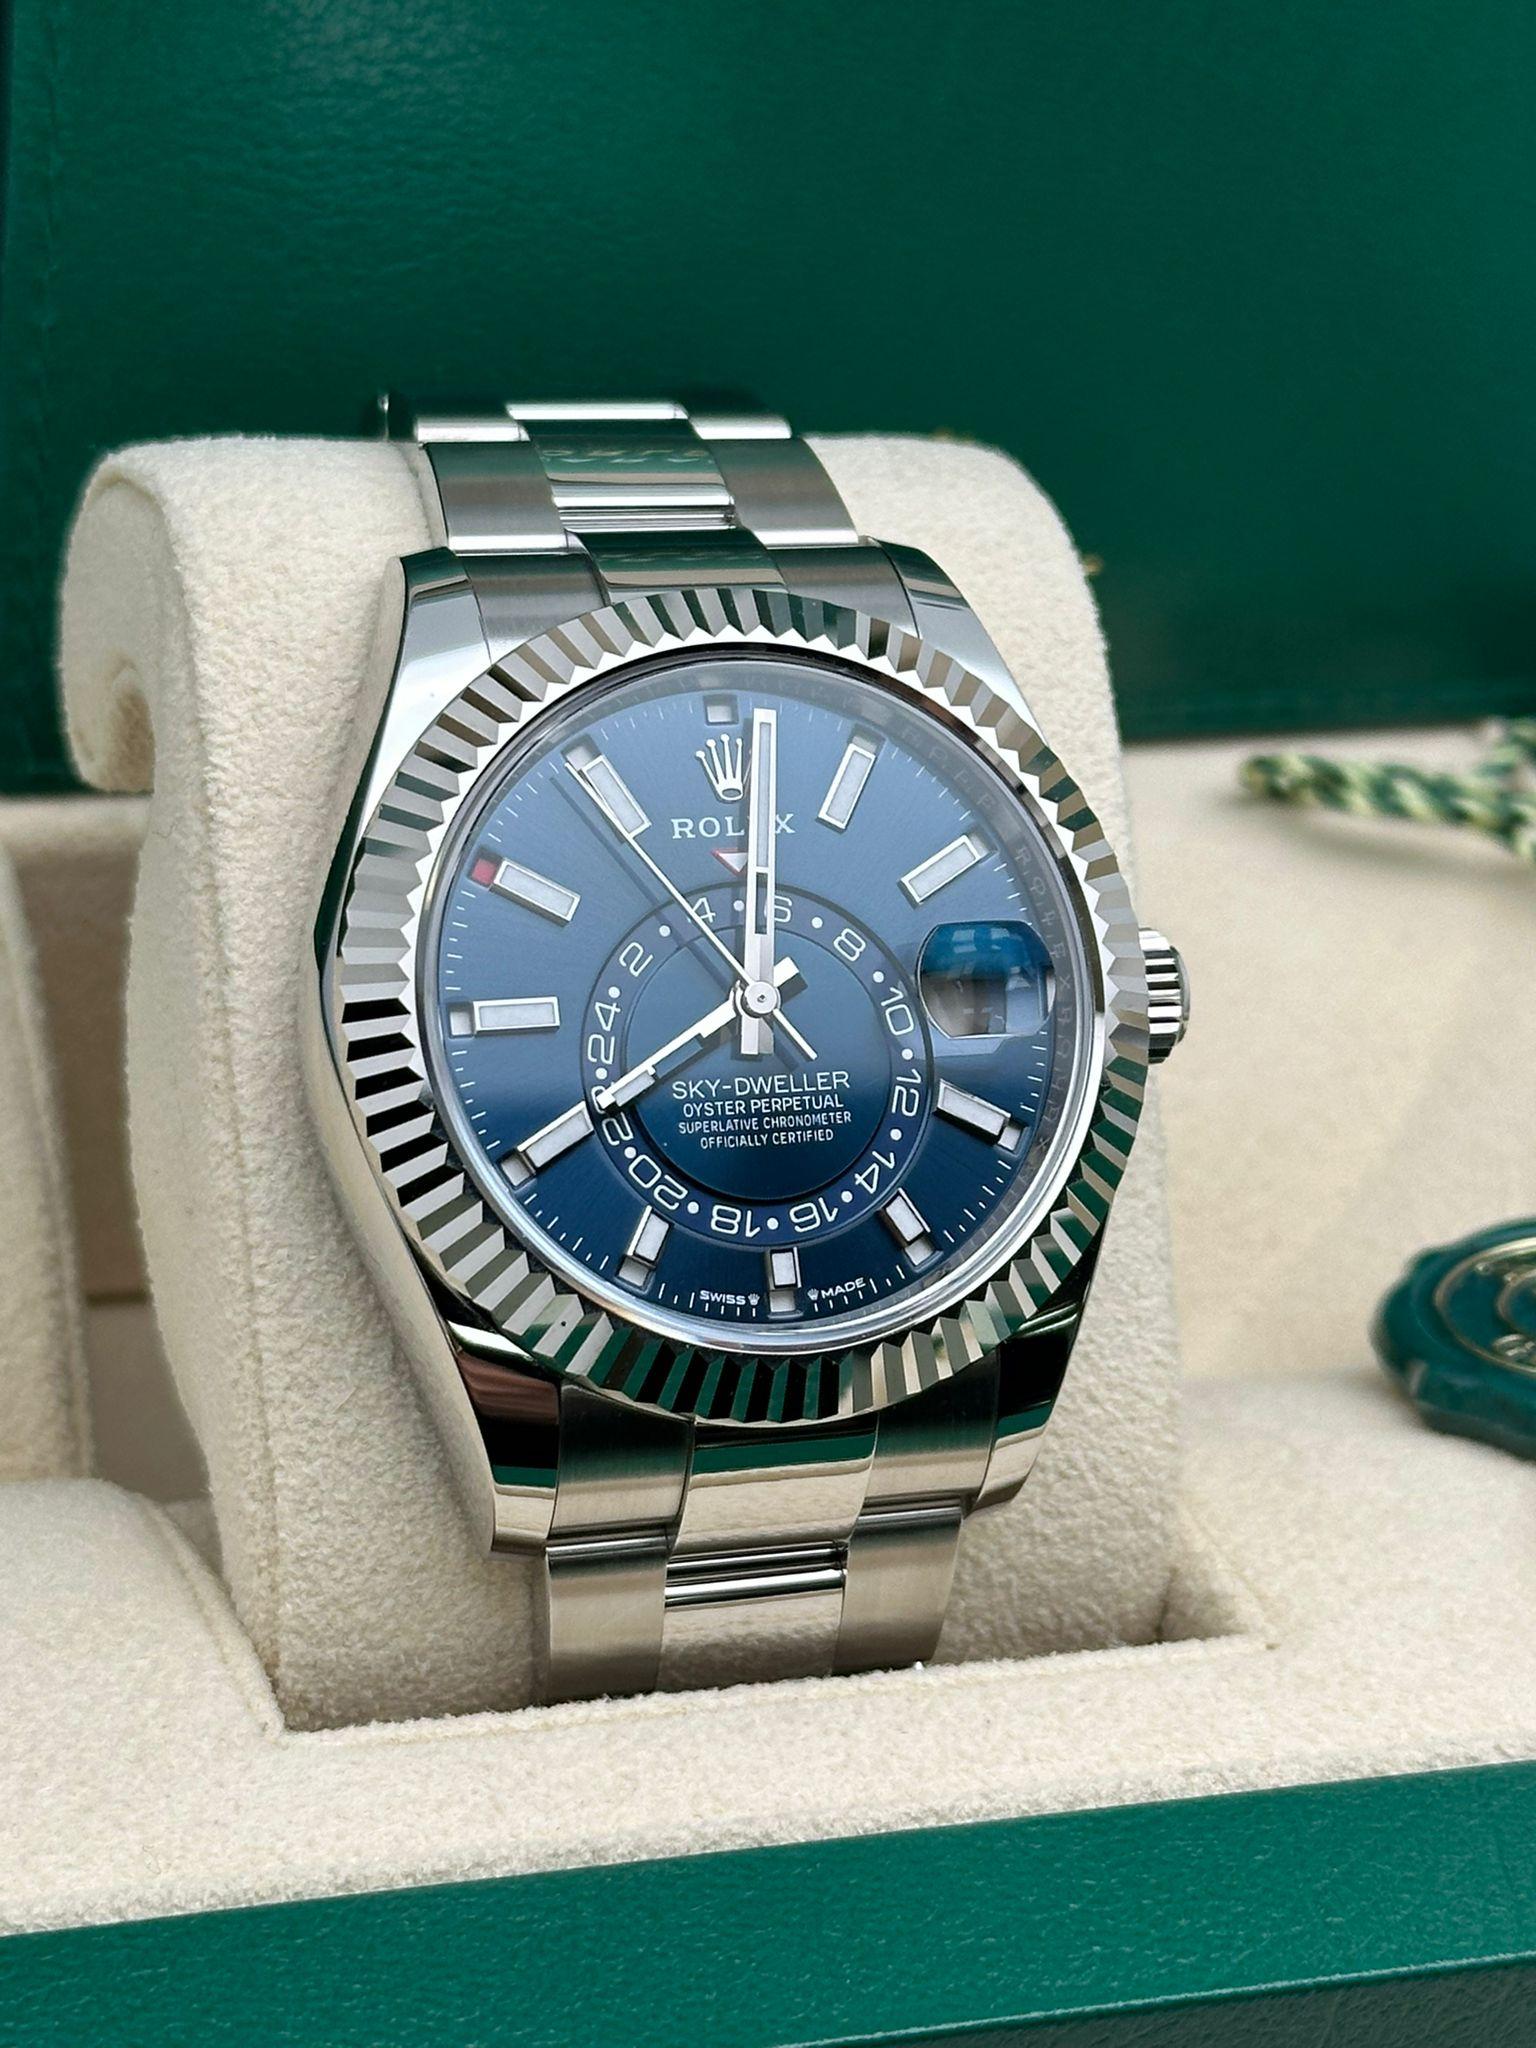 Brand new 2023-2024. Comes with the original box and papers. 

* Free Shipping within the USA
* Five-year Rolex warranty coverage
* 14-day return policy with a full refund. Buyers can verify the watch's authenticity at any boutique or dealership